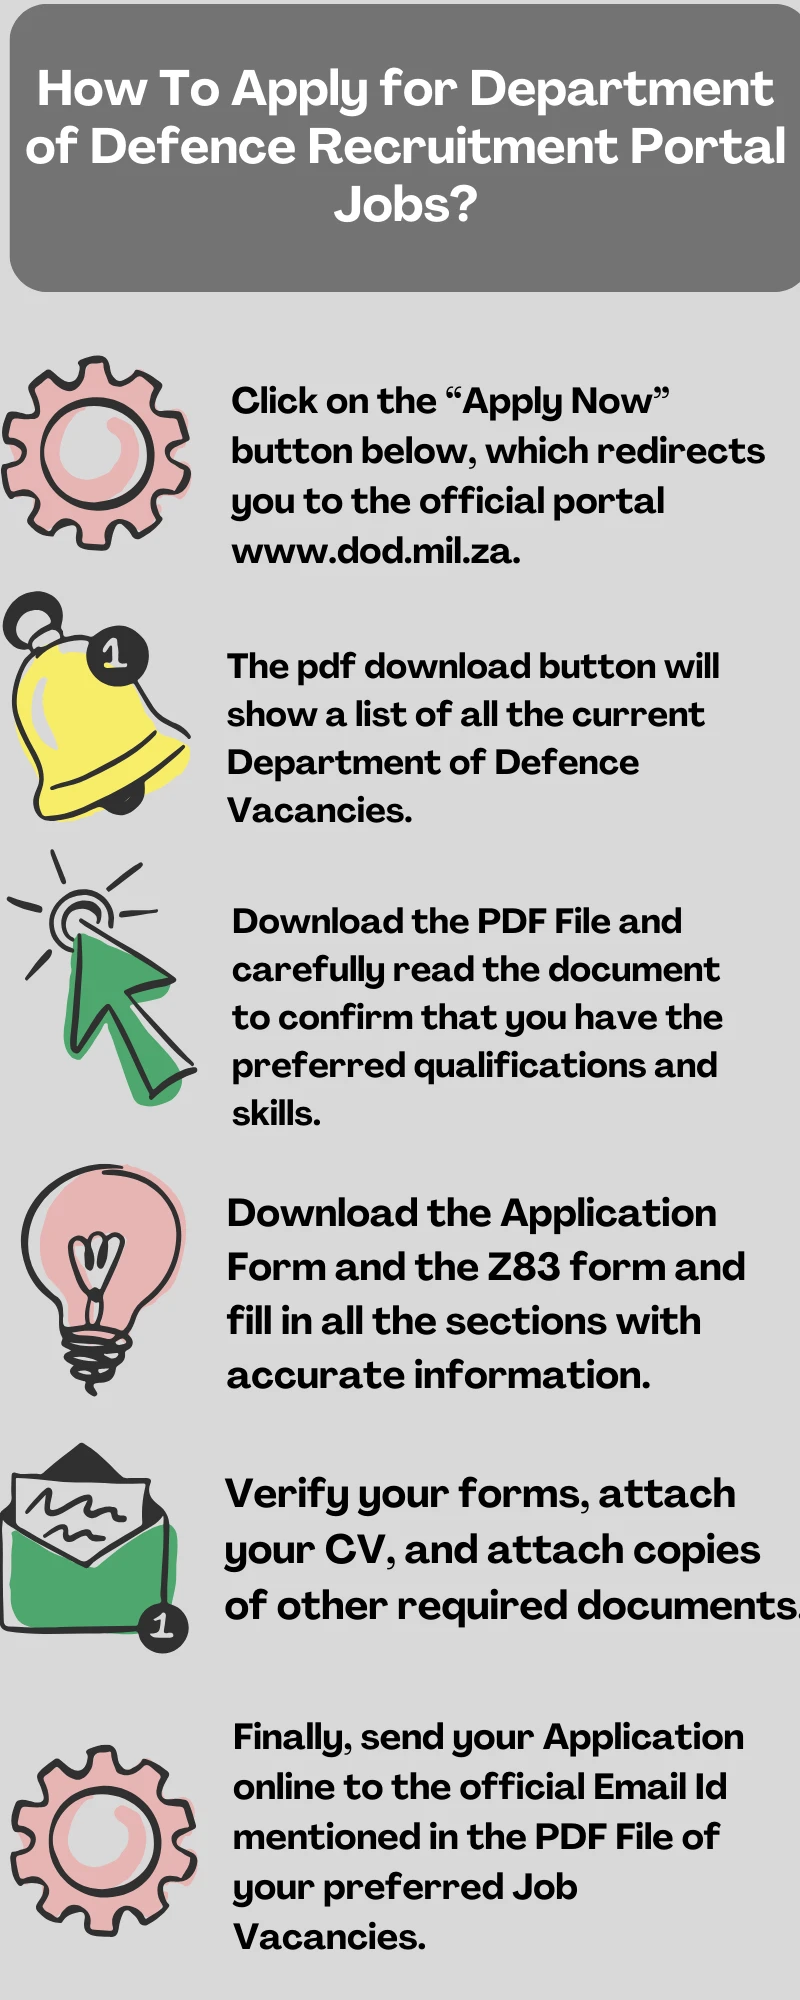 How To Apply for Department of Defence Recruitment Portal Jobs?